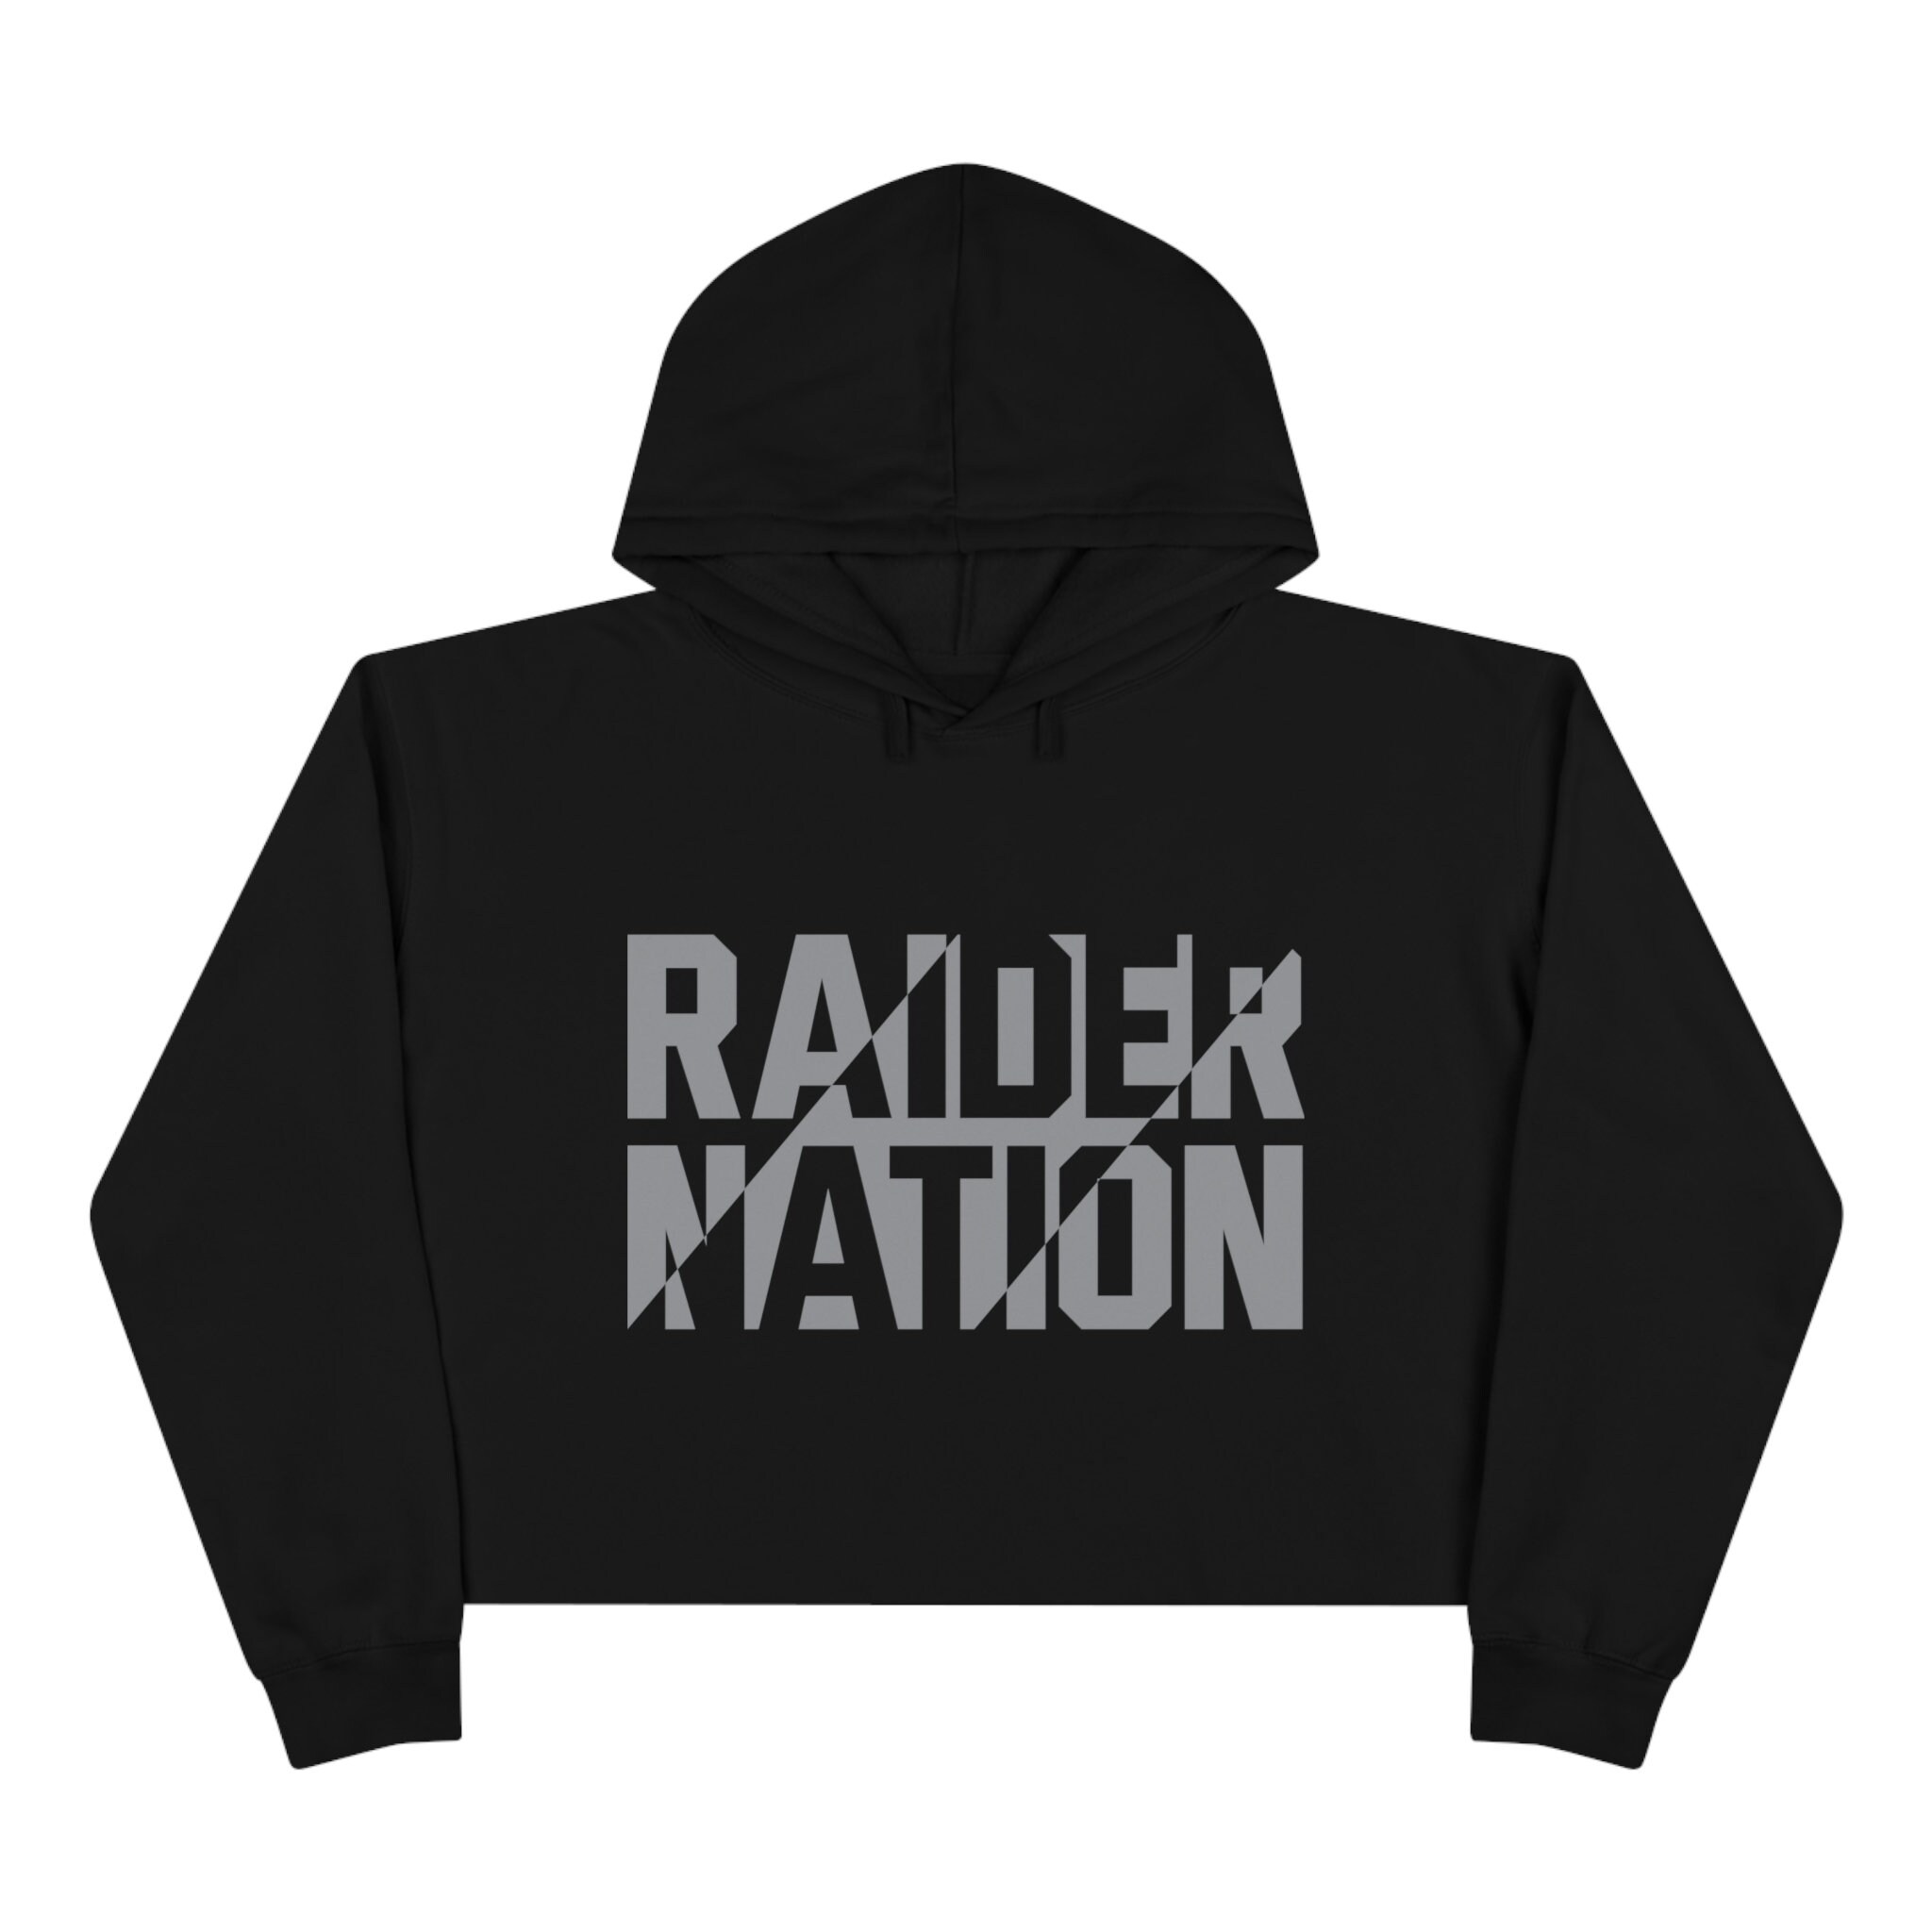 LV Raiders Hoodie 3D Highly Effective Grim Reaper Best Gift For Raiders Fan  - Personalized Gifts: Family, Sports, Occasions, Trending